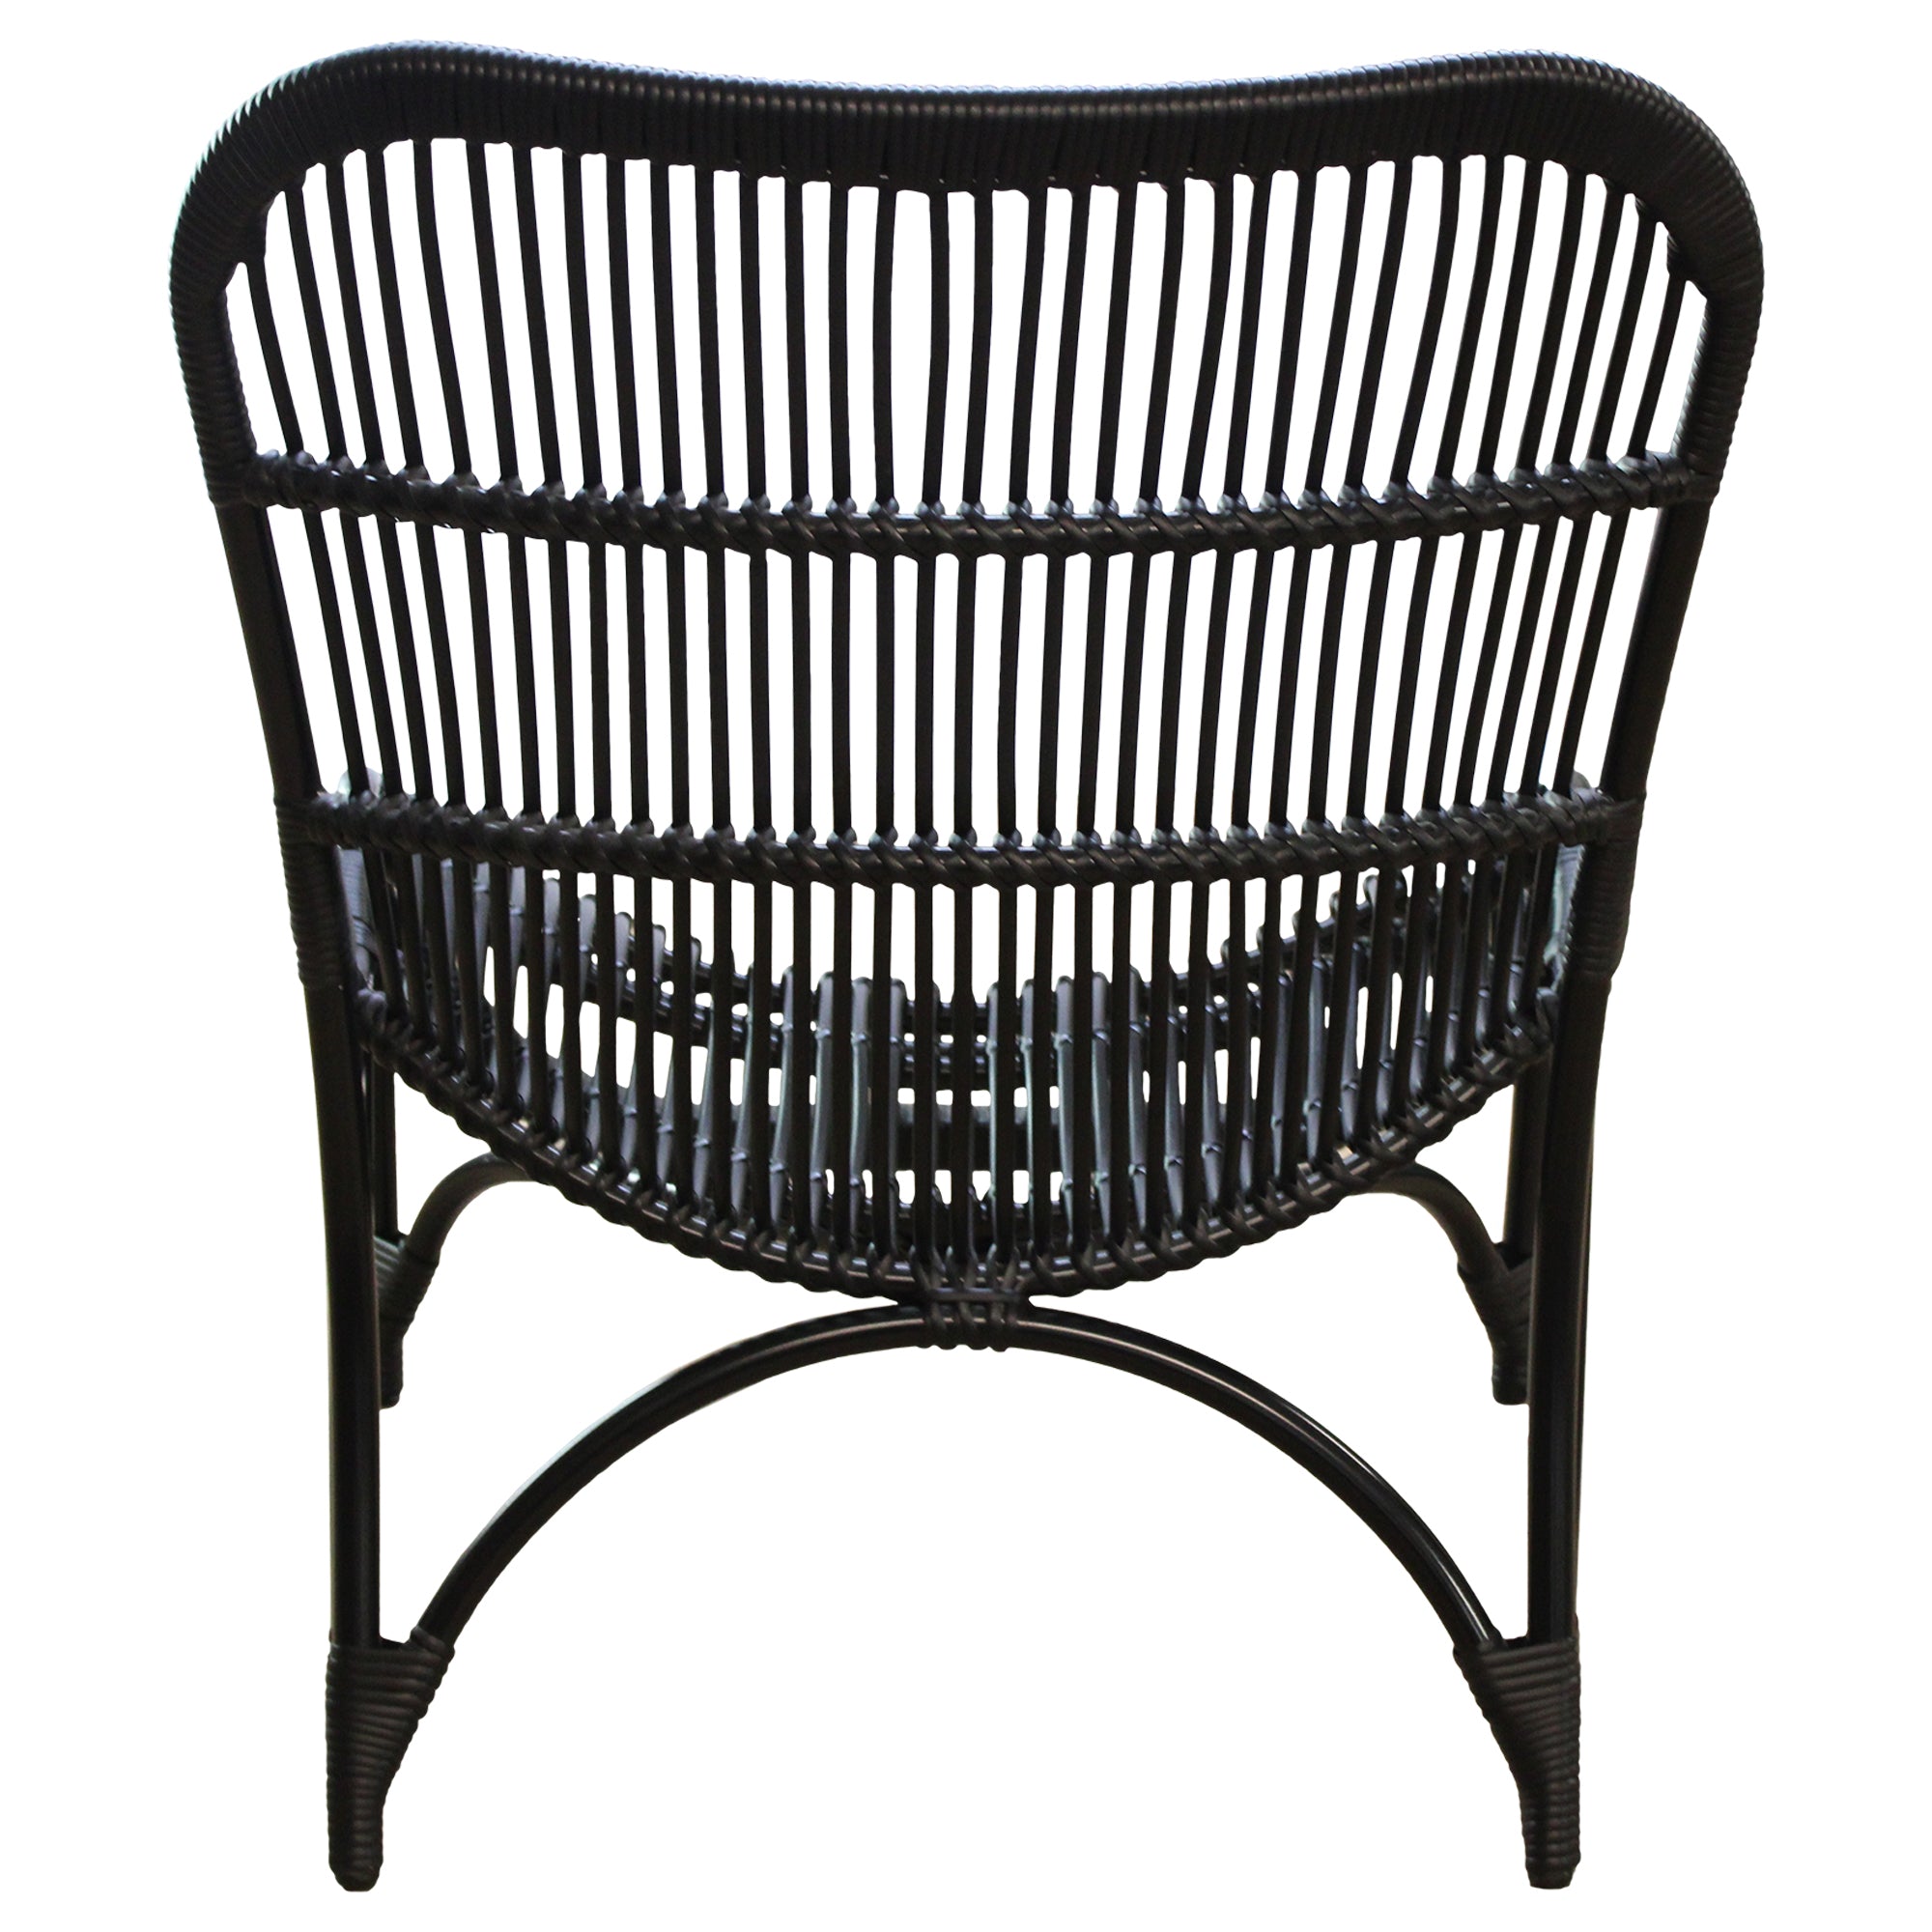 Black Wicker Chair - Preowned